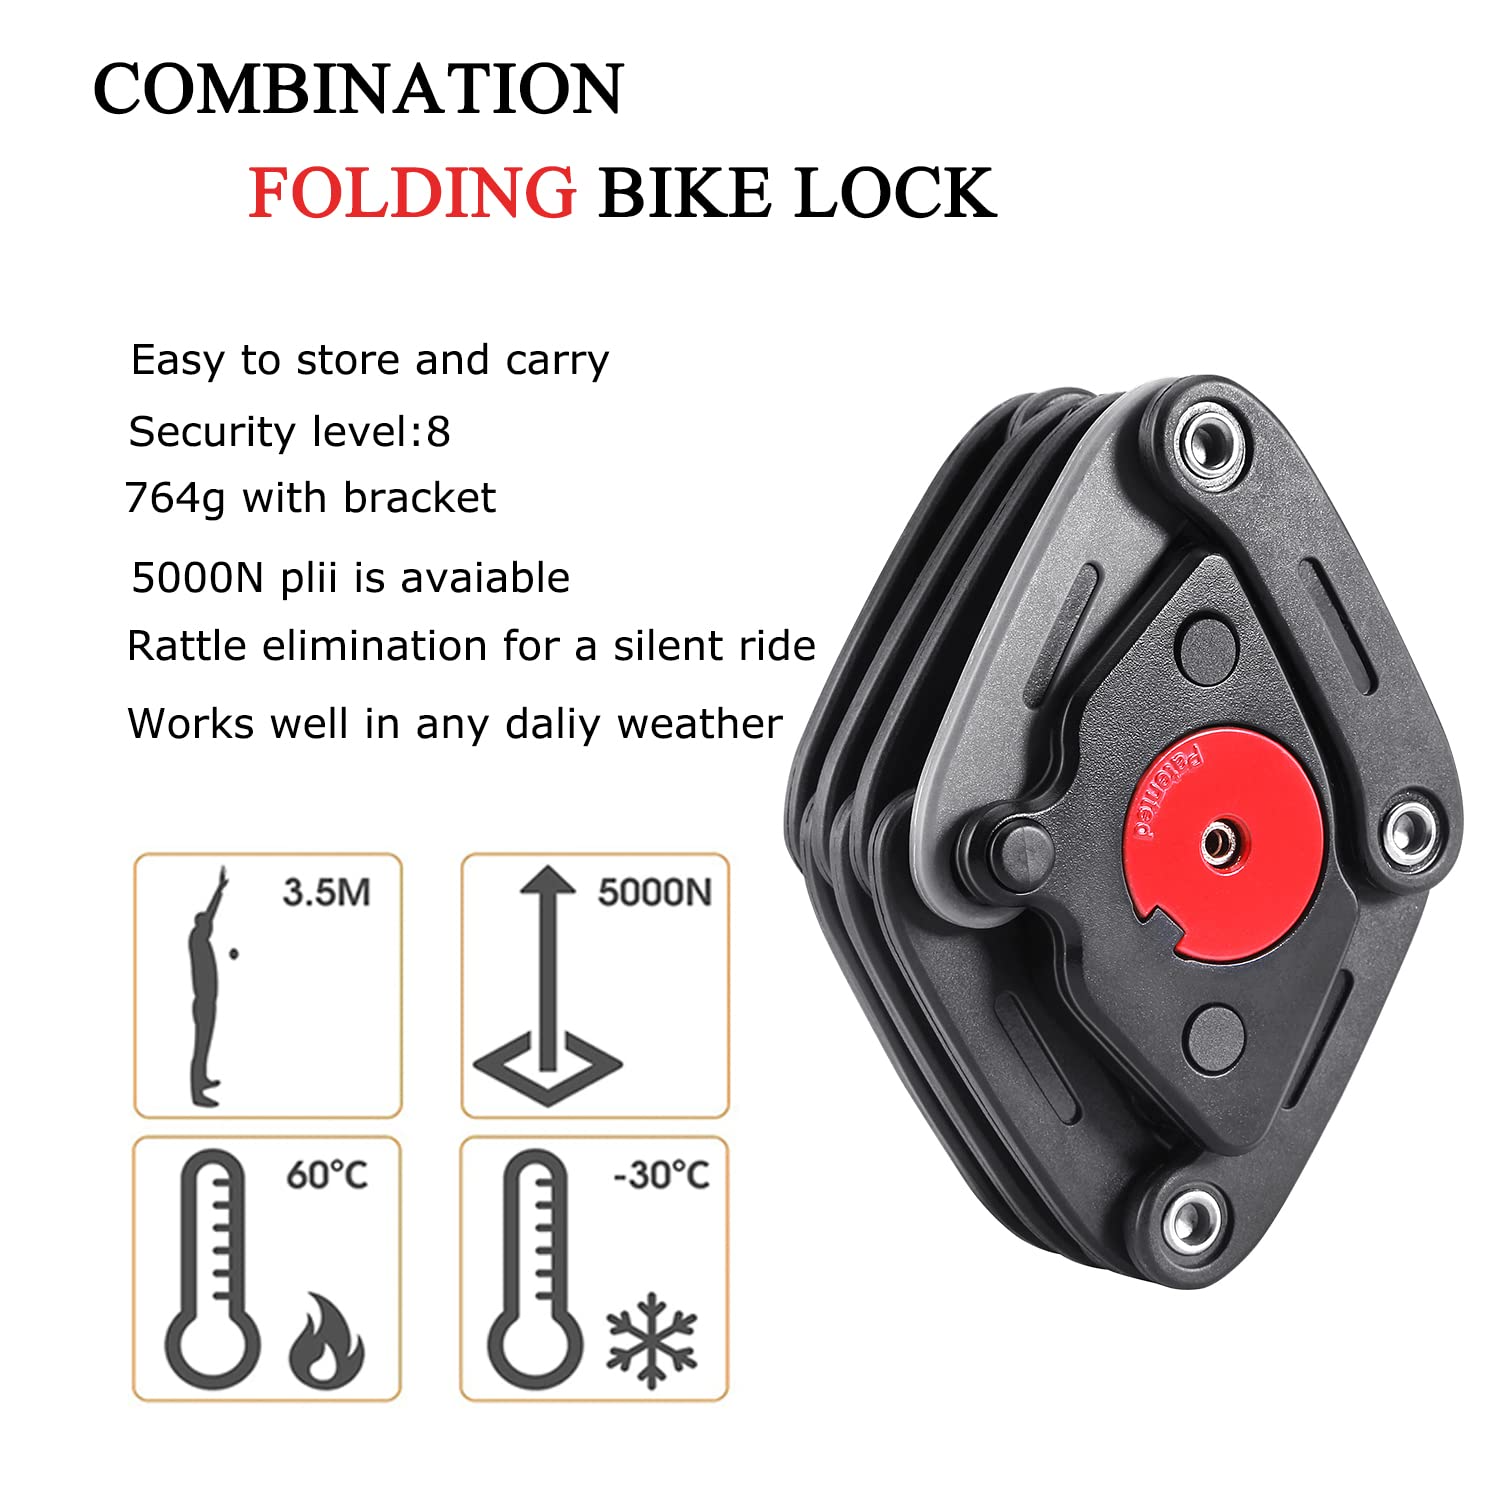 Folding Bike Lock with 2 Keys - Anti Theft Strong Security Bicycle Locks, Anti Drill & Pick Cylinder - Foldable Bike Lock with Mounting Bracket (2.8 ft/1.4lb)